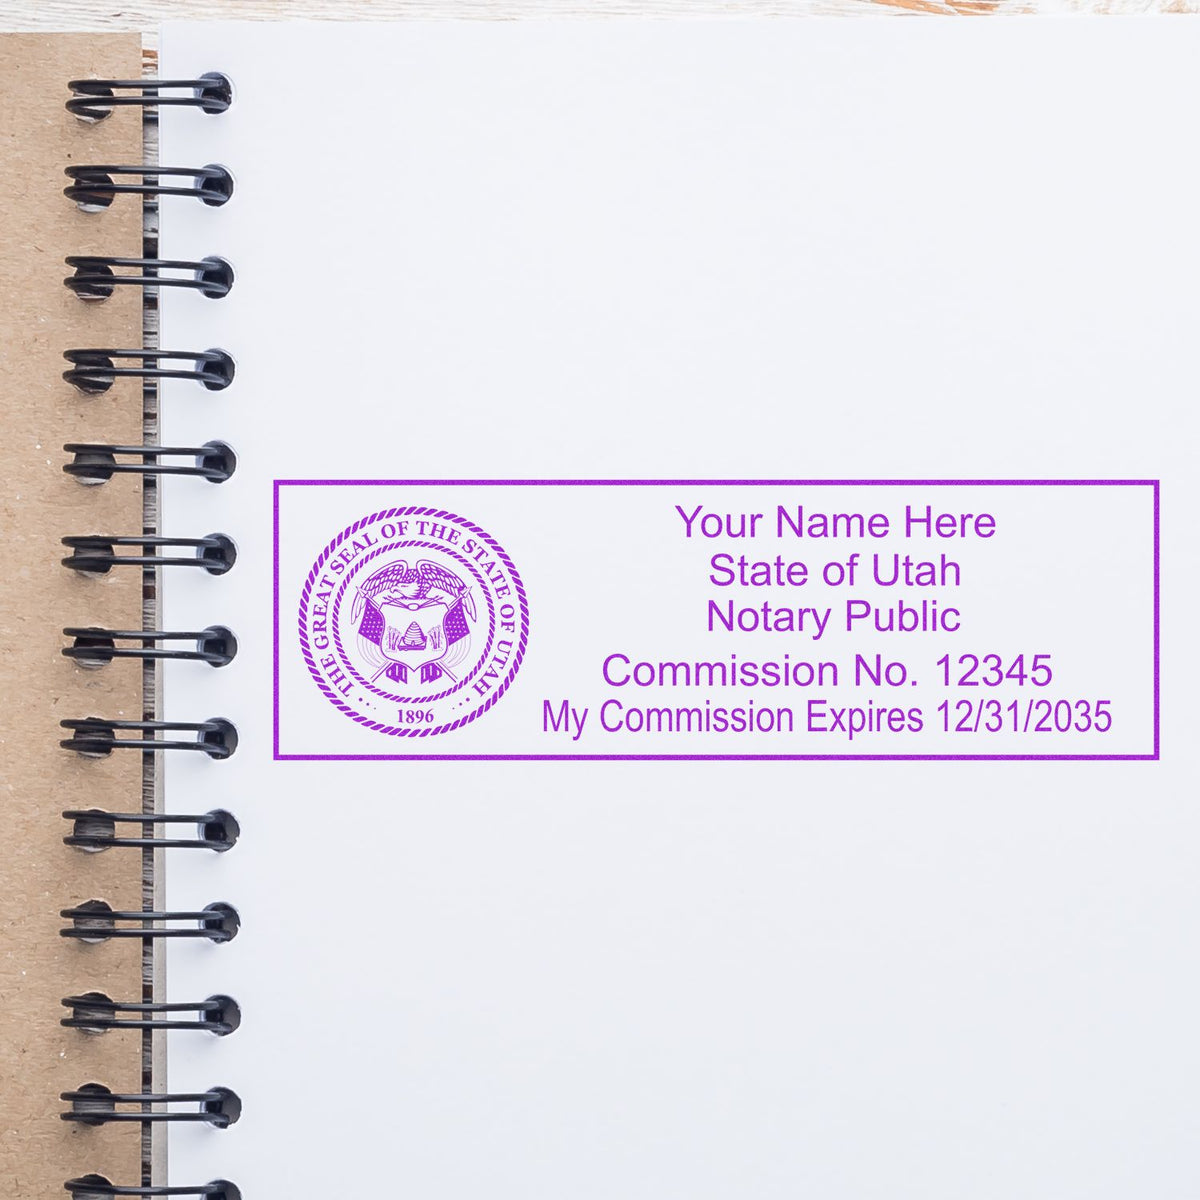 The PSI Utah Notary Stamp stamp impression comes to life with a crisp, detailed photo on paper - showcasing true professional quality.